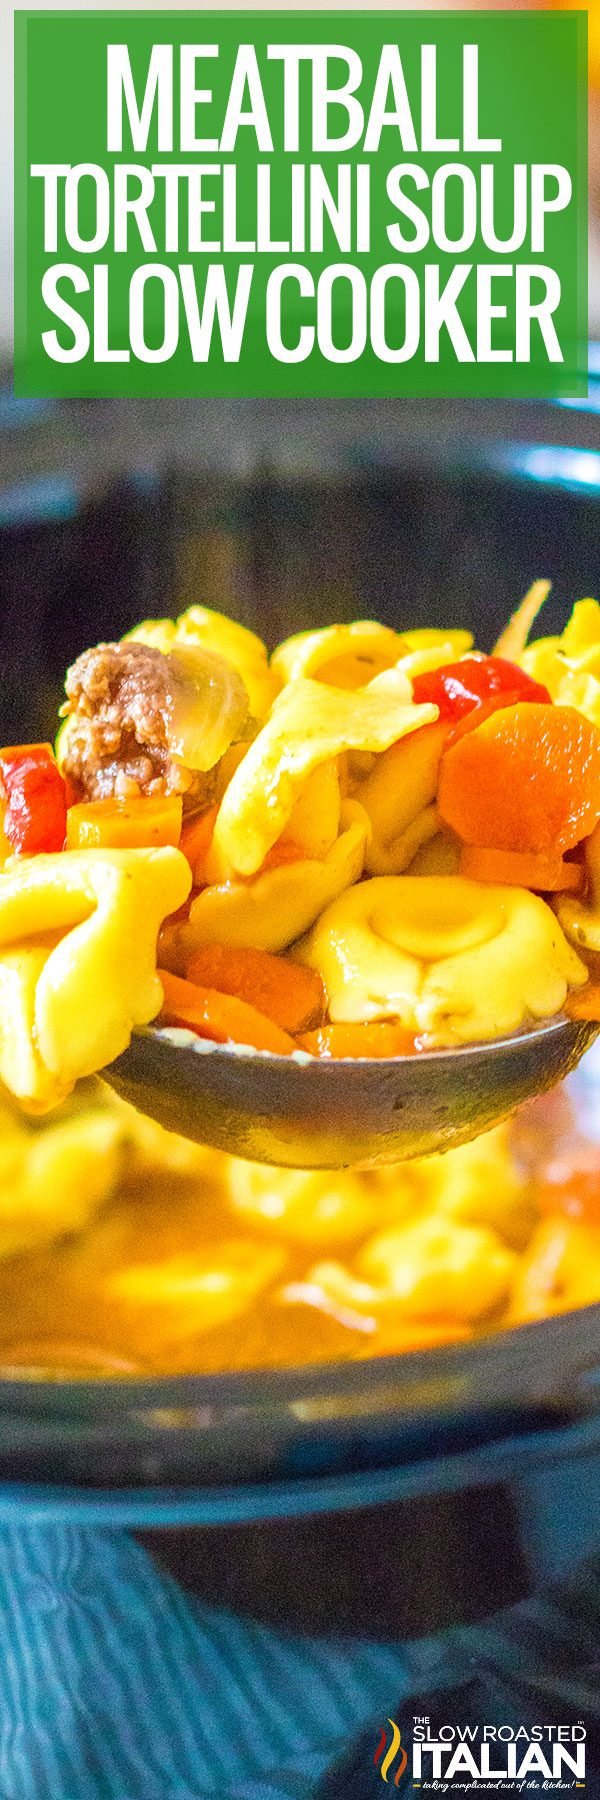 titled image (and shown): crockpot tortellini soup with meatballs